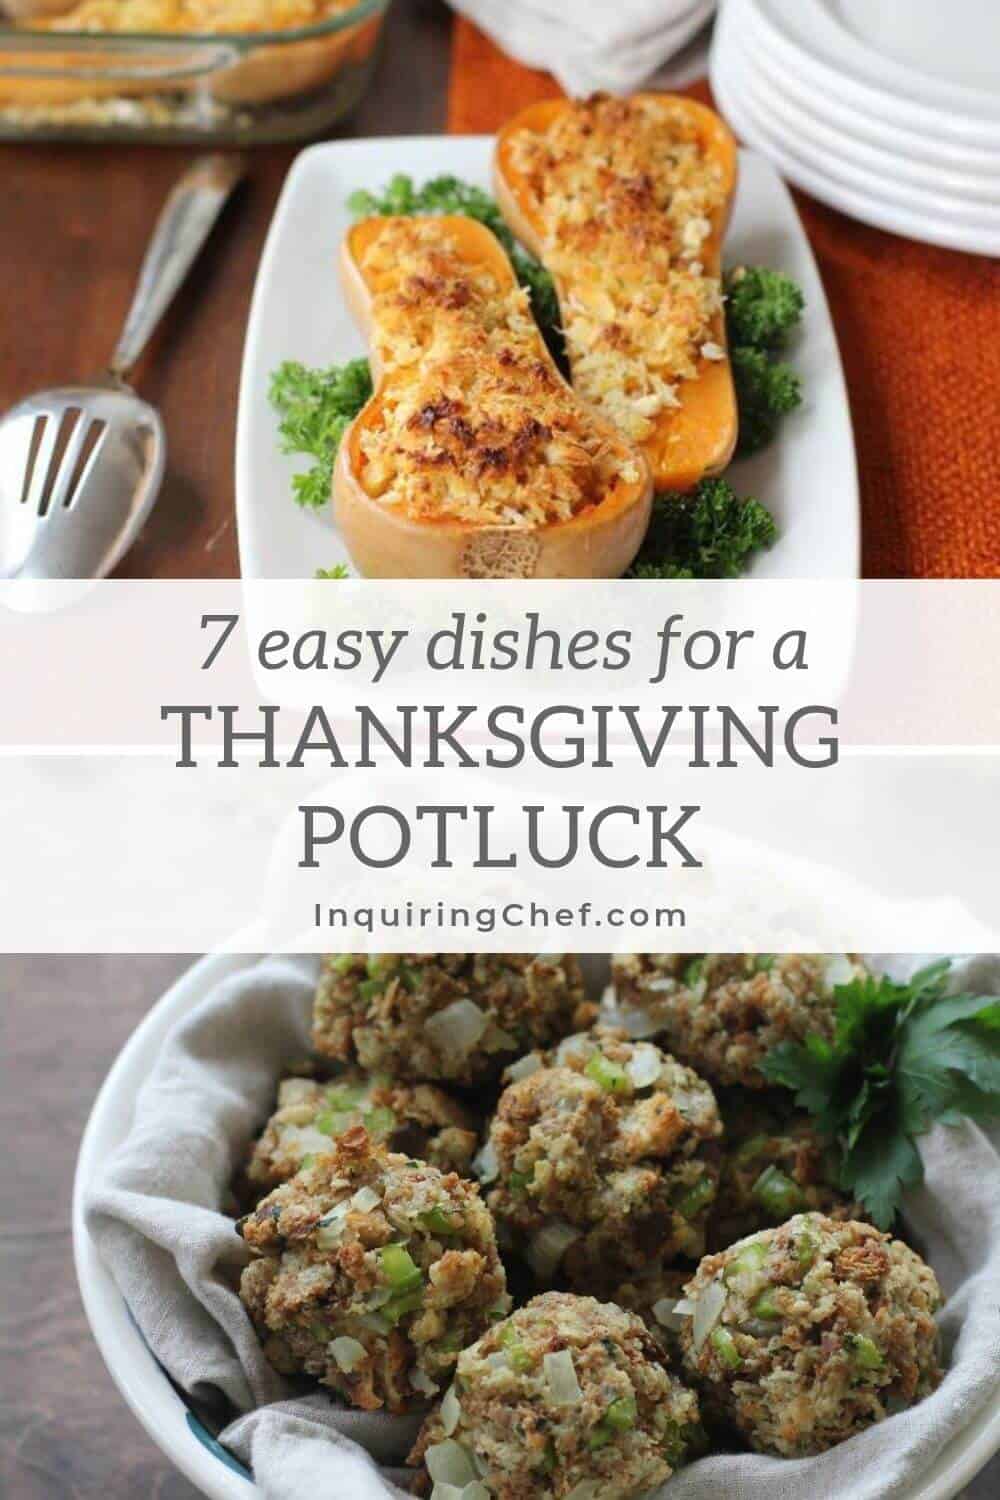 7 easy dishes for thanksgiving potluck